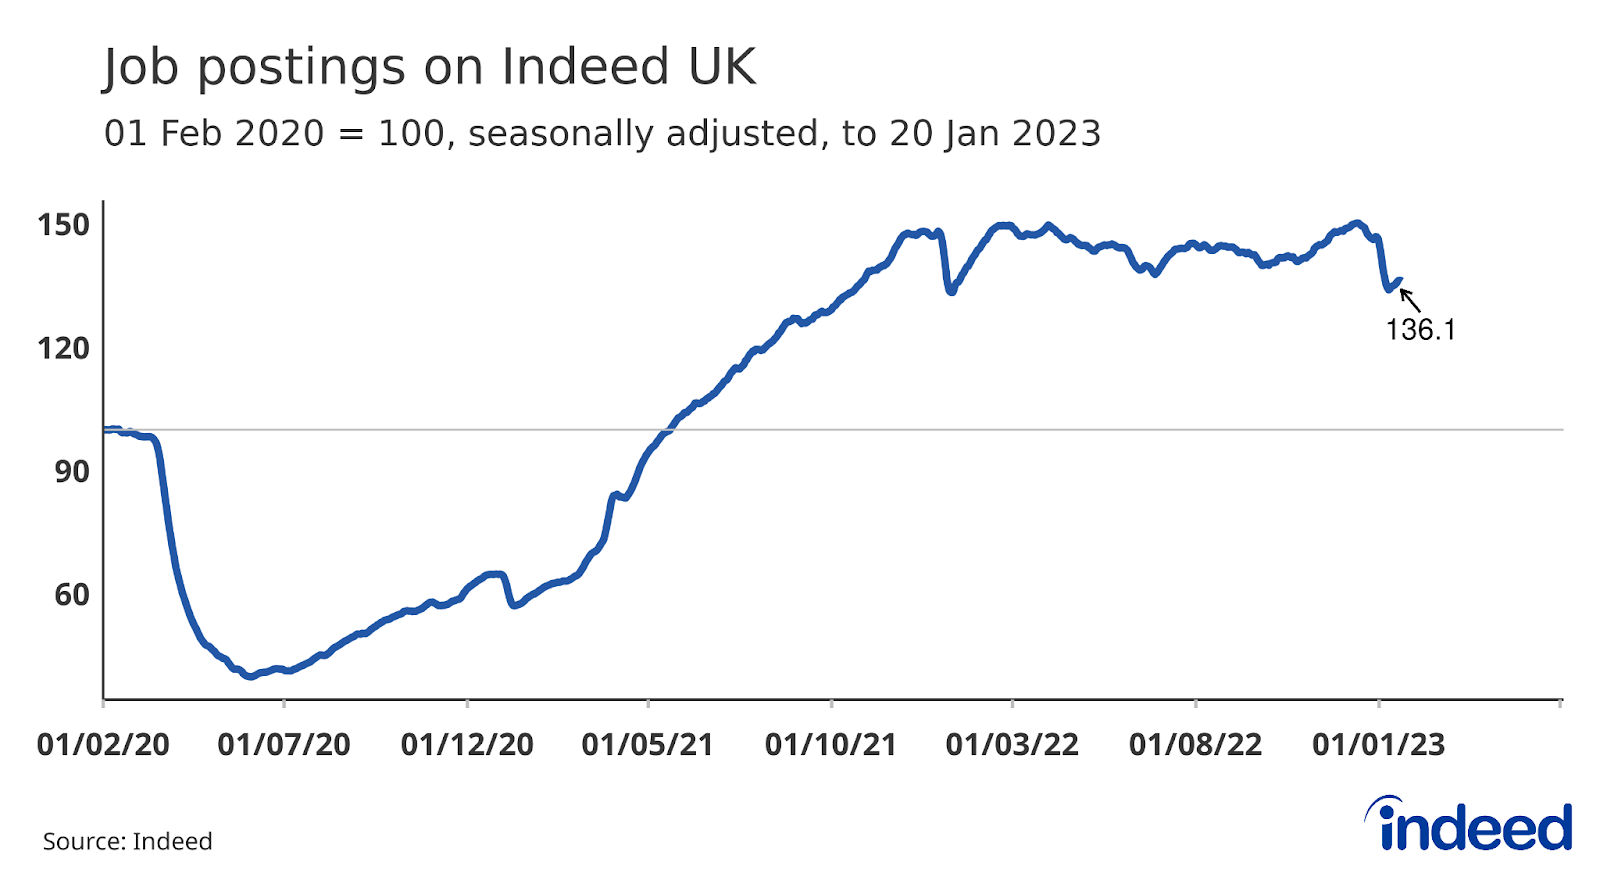 A line graph titled “Job postings on Indeed UK” showing the trend in job postings on Indeed UK since 01 Feb 2020, to 20 Jan 2023.